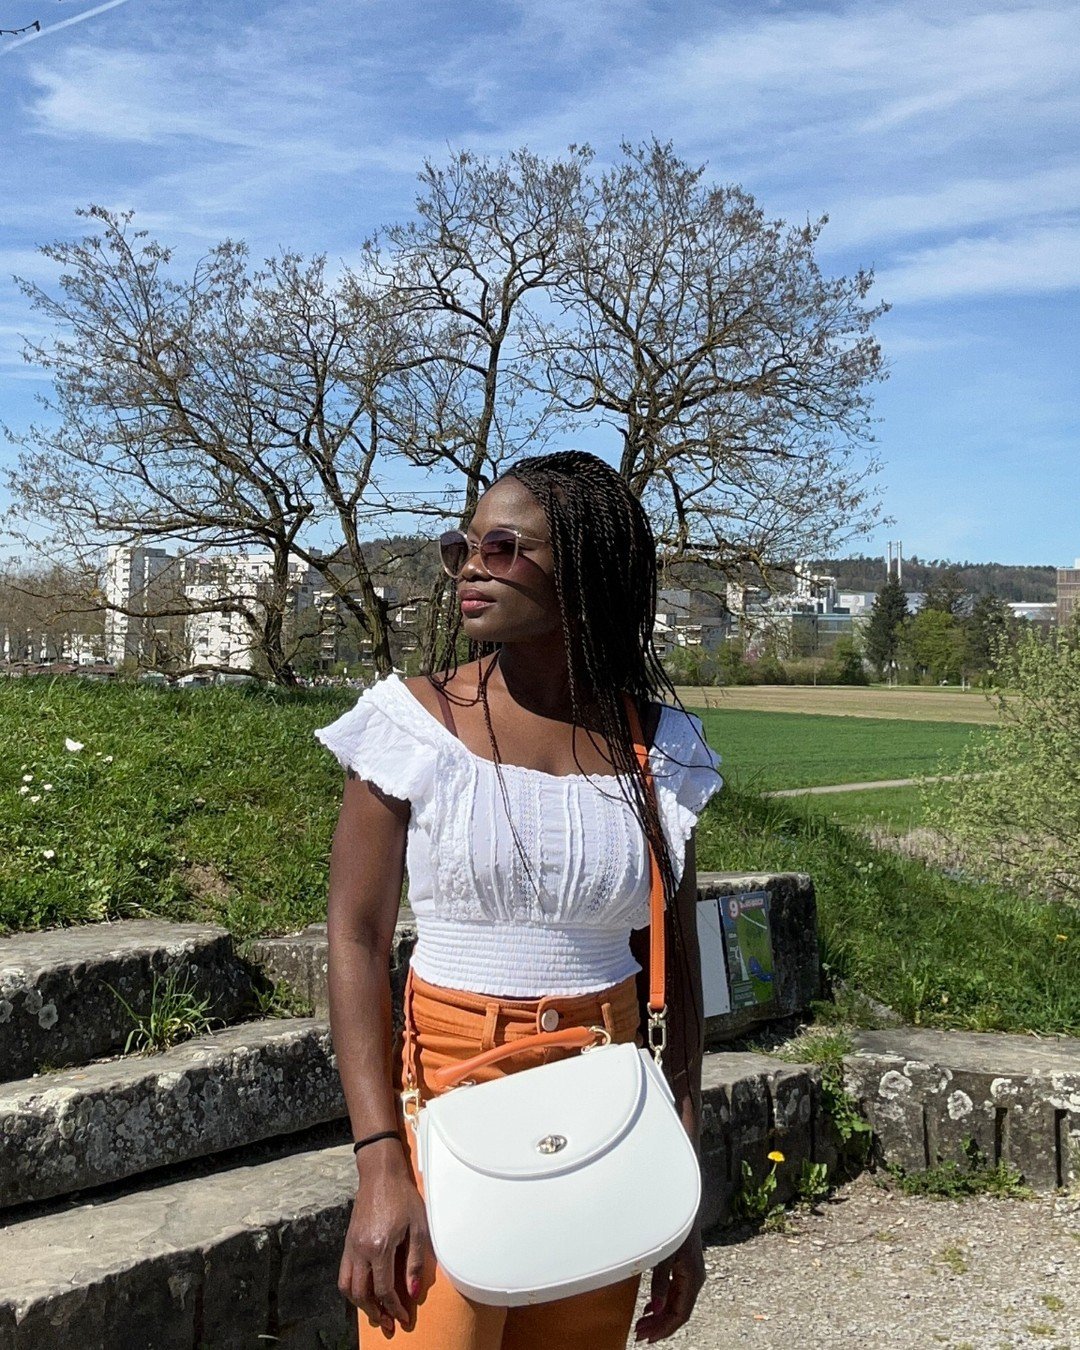 Who else is ready for warmer weather? ☀️

Match your Laoise handbag to the upcoming summer season with our interchangeable straps 👜

Shop now at KAEINTHE.com

#handbag #laoise #purse #leathergoods #leatherpurse #leatherhandbag #interchangeablepurse 